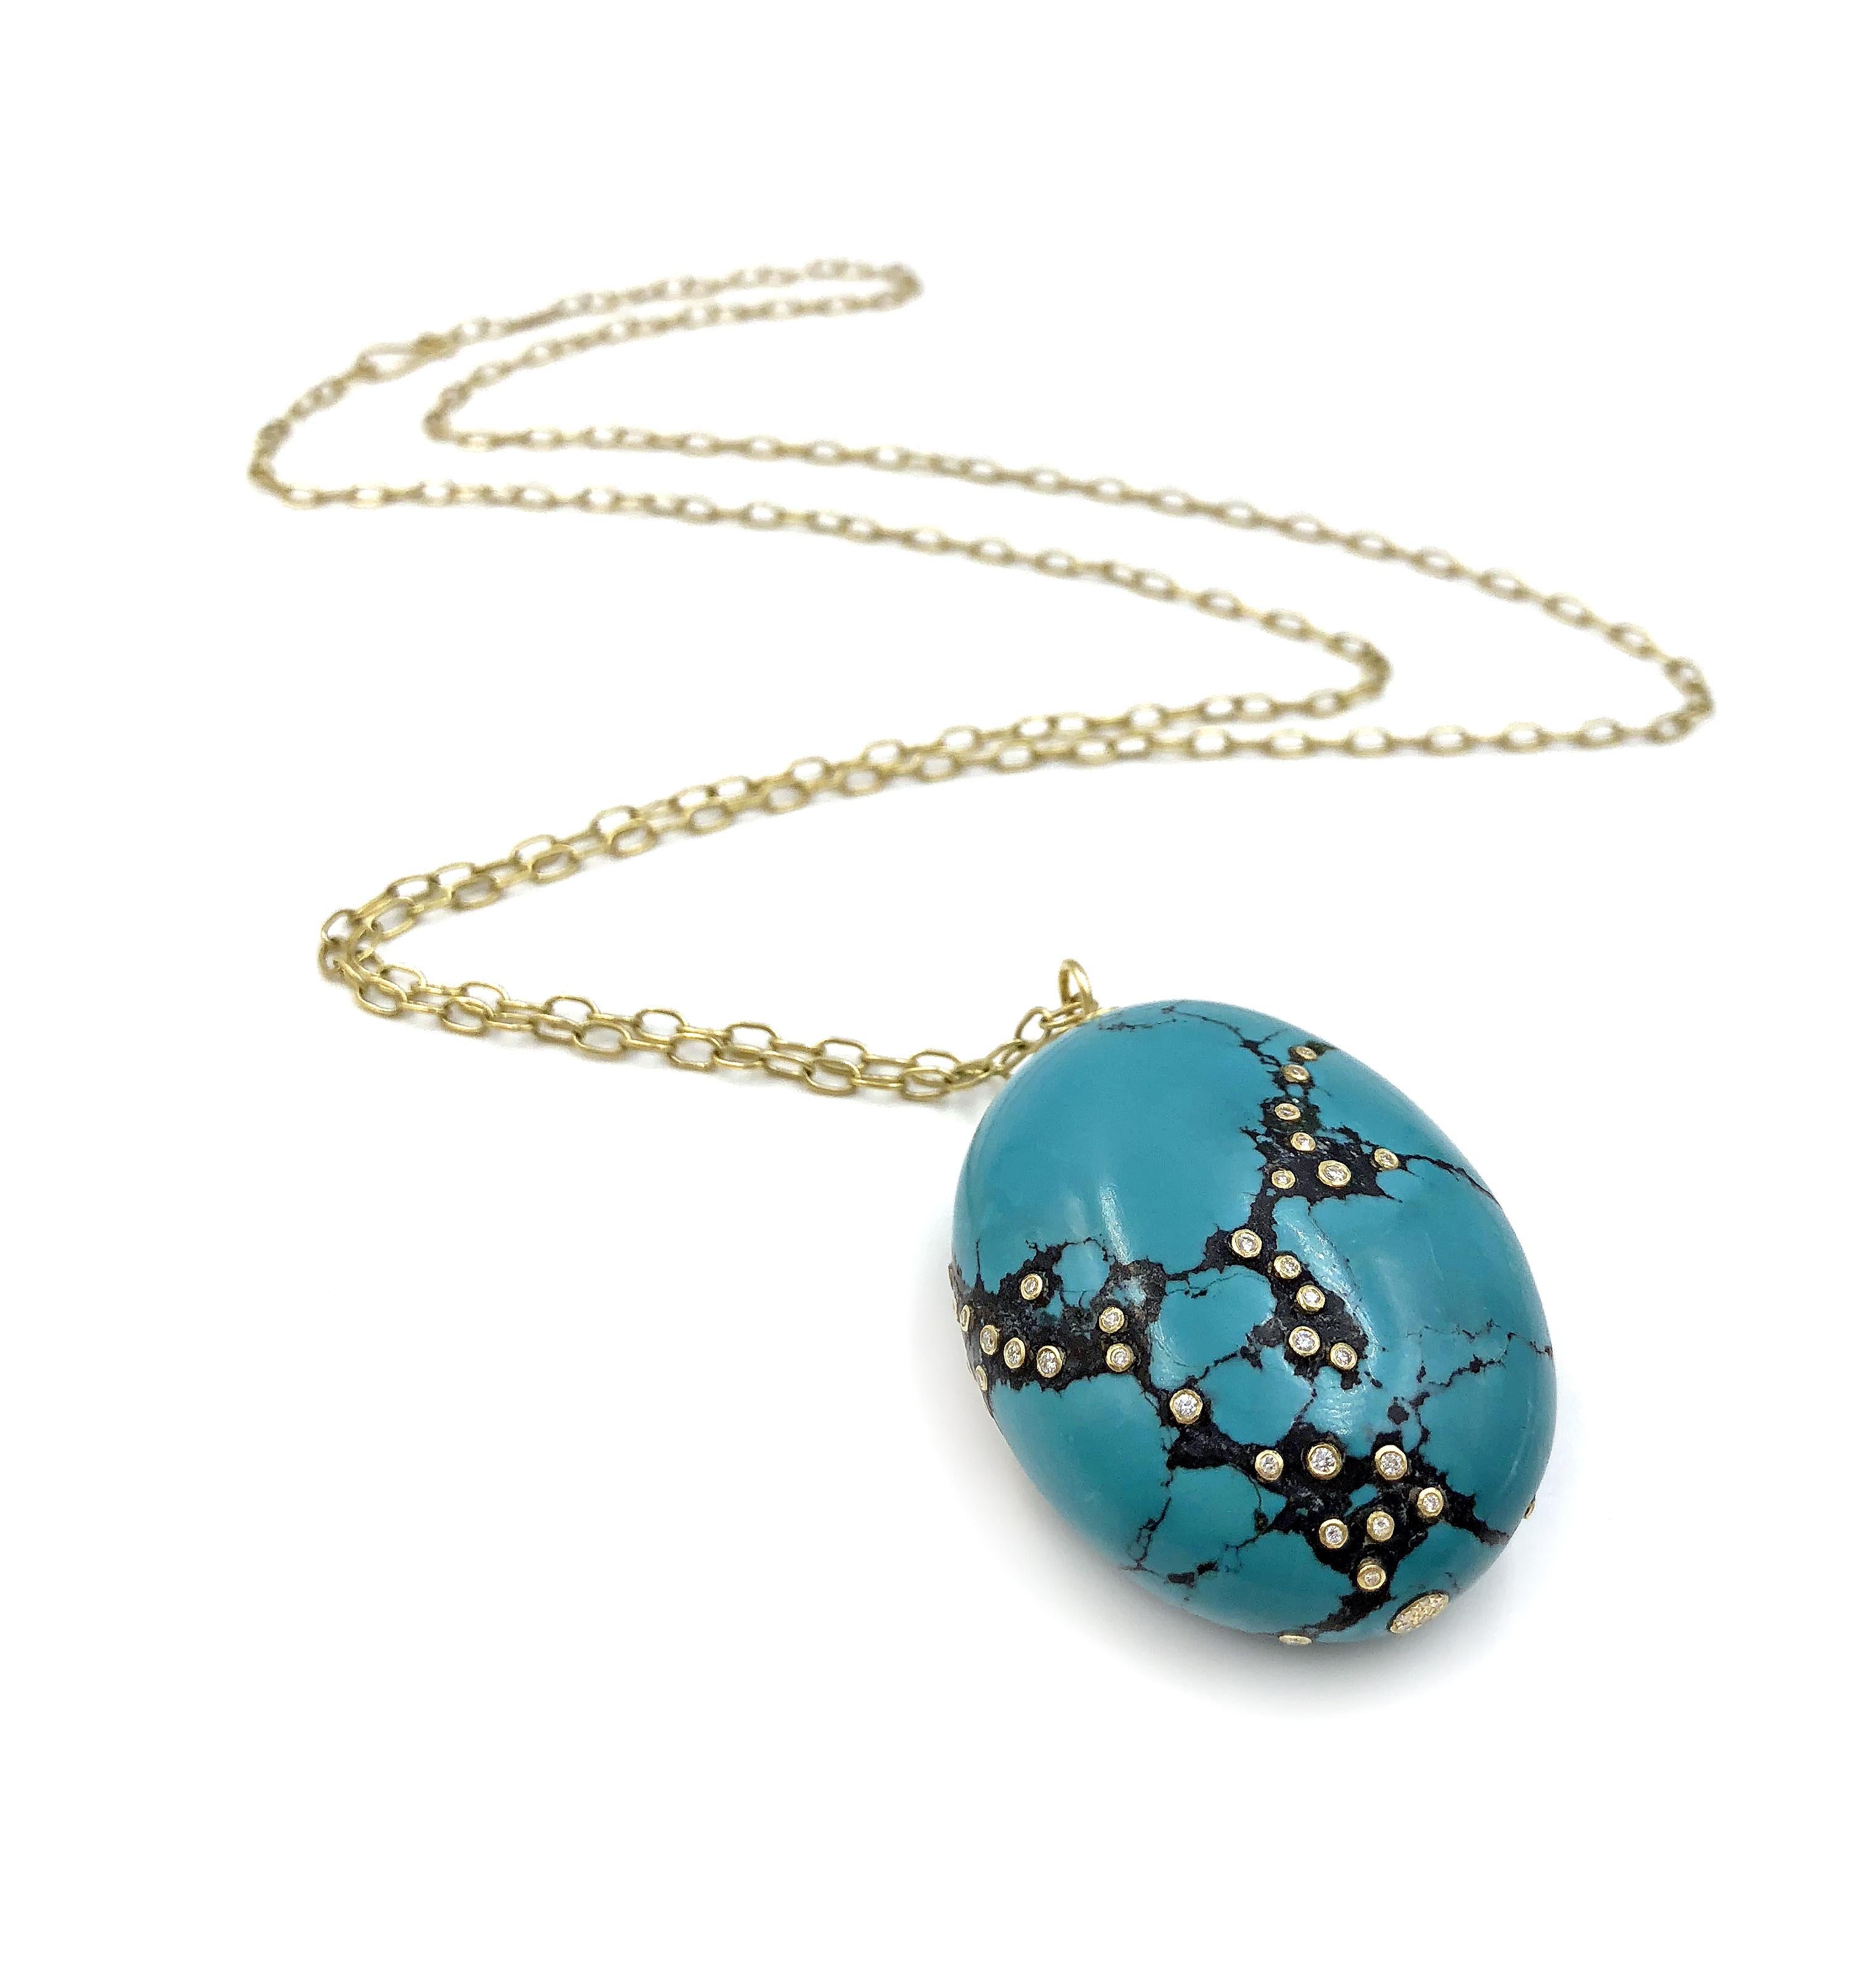 One of a Kind Scatter Necklace handmade by jewelry artist Tej Kothari in matte-finished 18k yellow gold chain (33 inches long) showcasing a turquoise oval egg pendant embedded with round brilliant cut white diamonds featured on both sides and